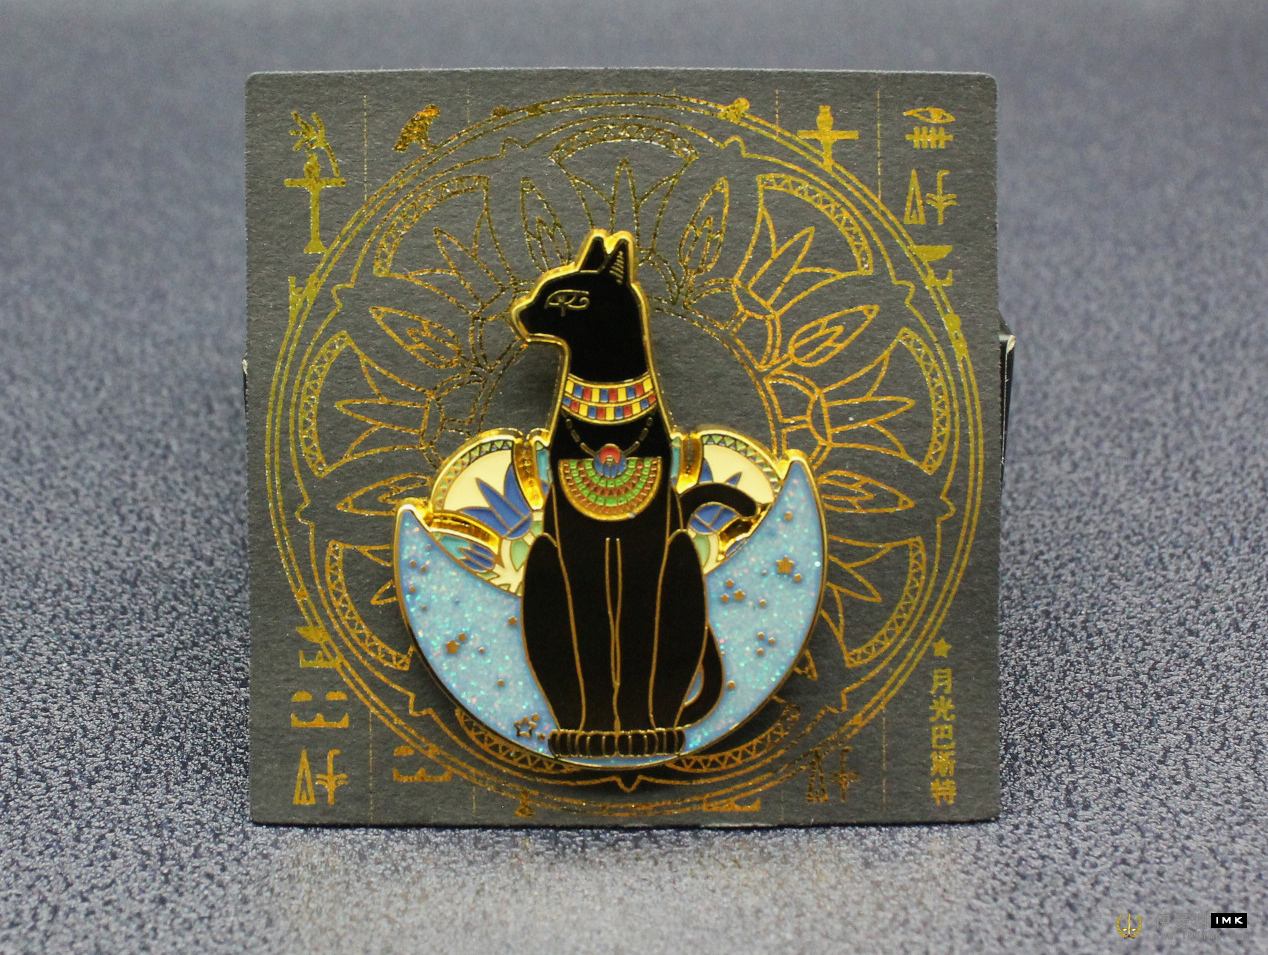 Meet the ancient Egyptian blind box badge